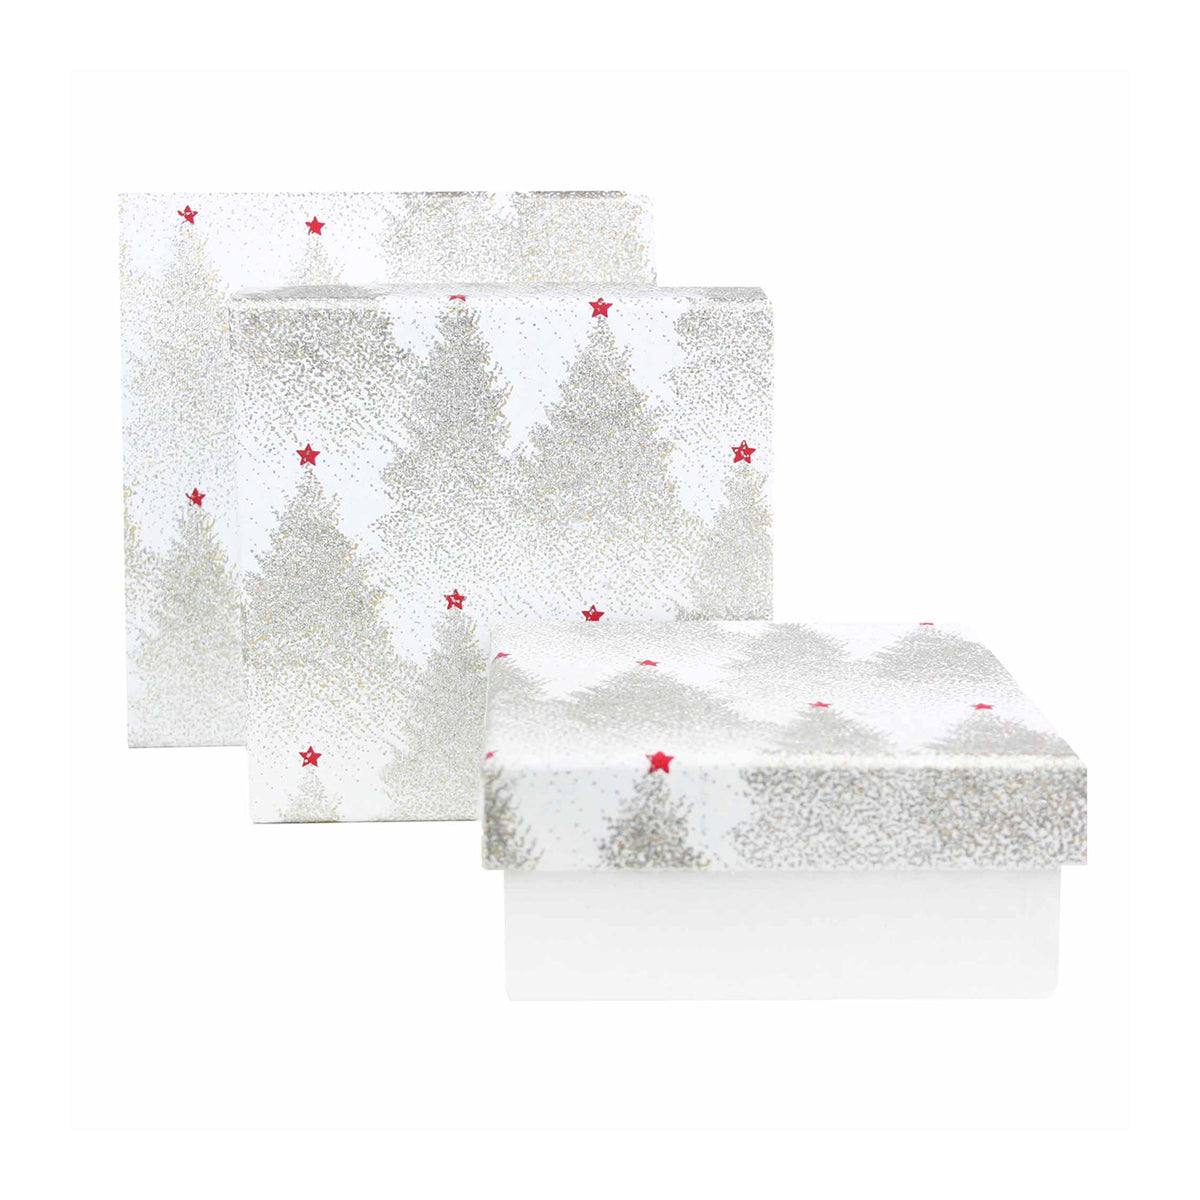 Handcrafted Glittery Winter Wonderland Gift Boxes - Set of 3